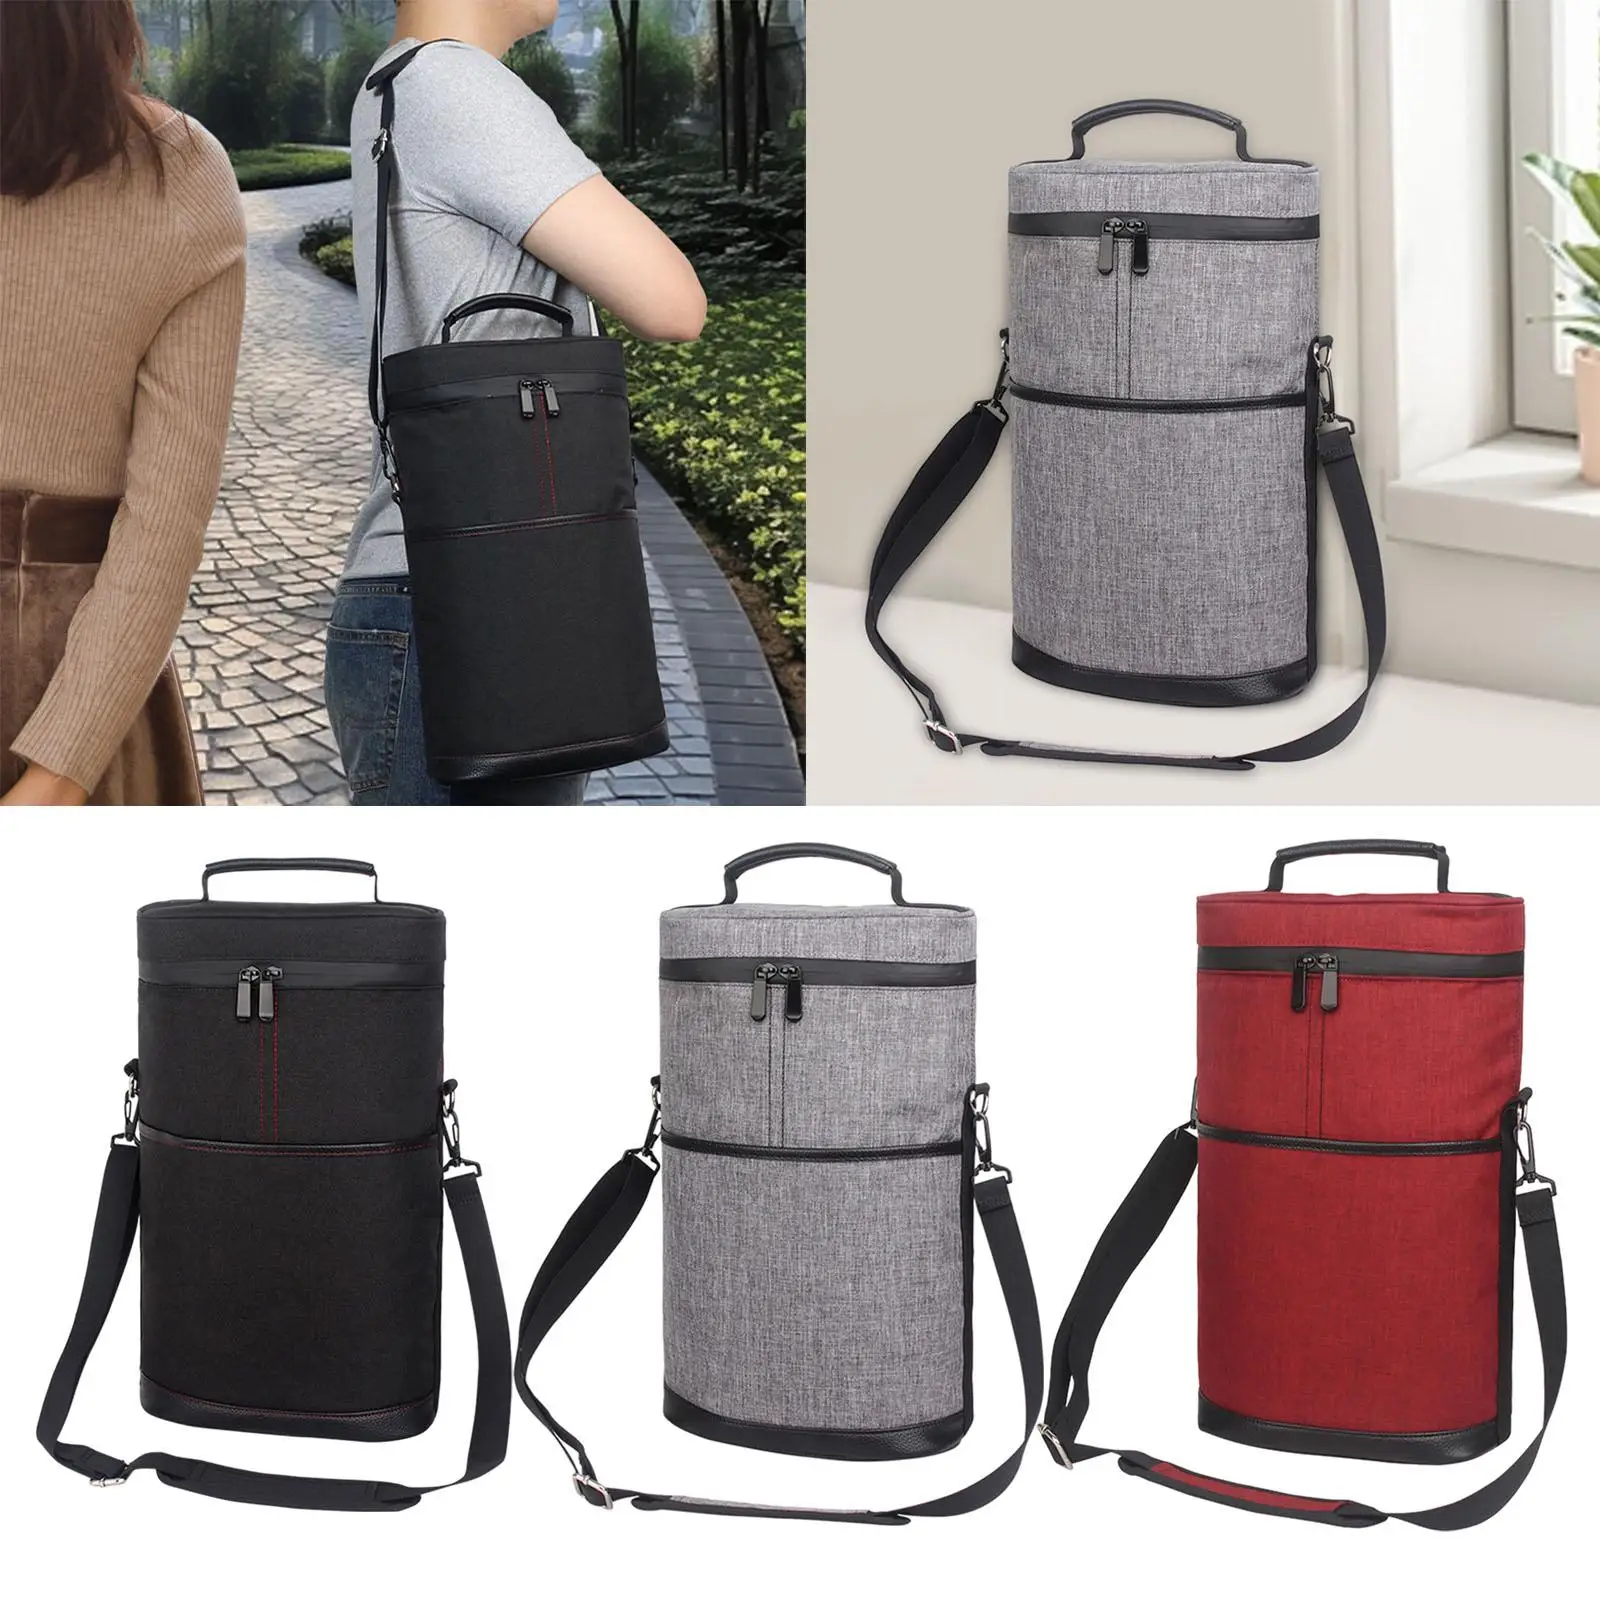 Thermal Lunch Bag Insulated Cooler Bag Portable Reusable Large Capacity Lunch Box Tote Bag for Lunch Work Outdoor Hiking Kids